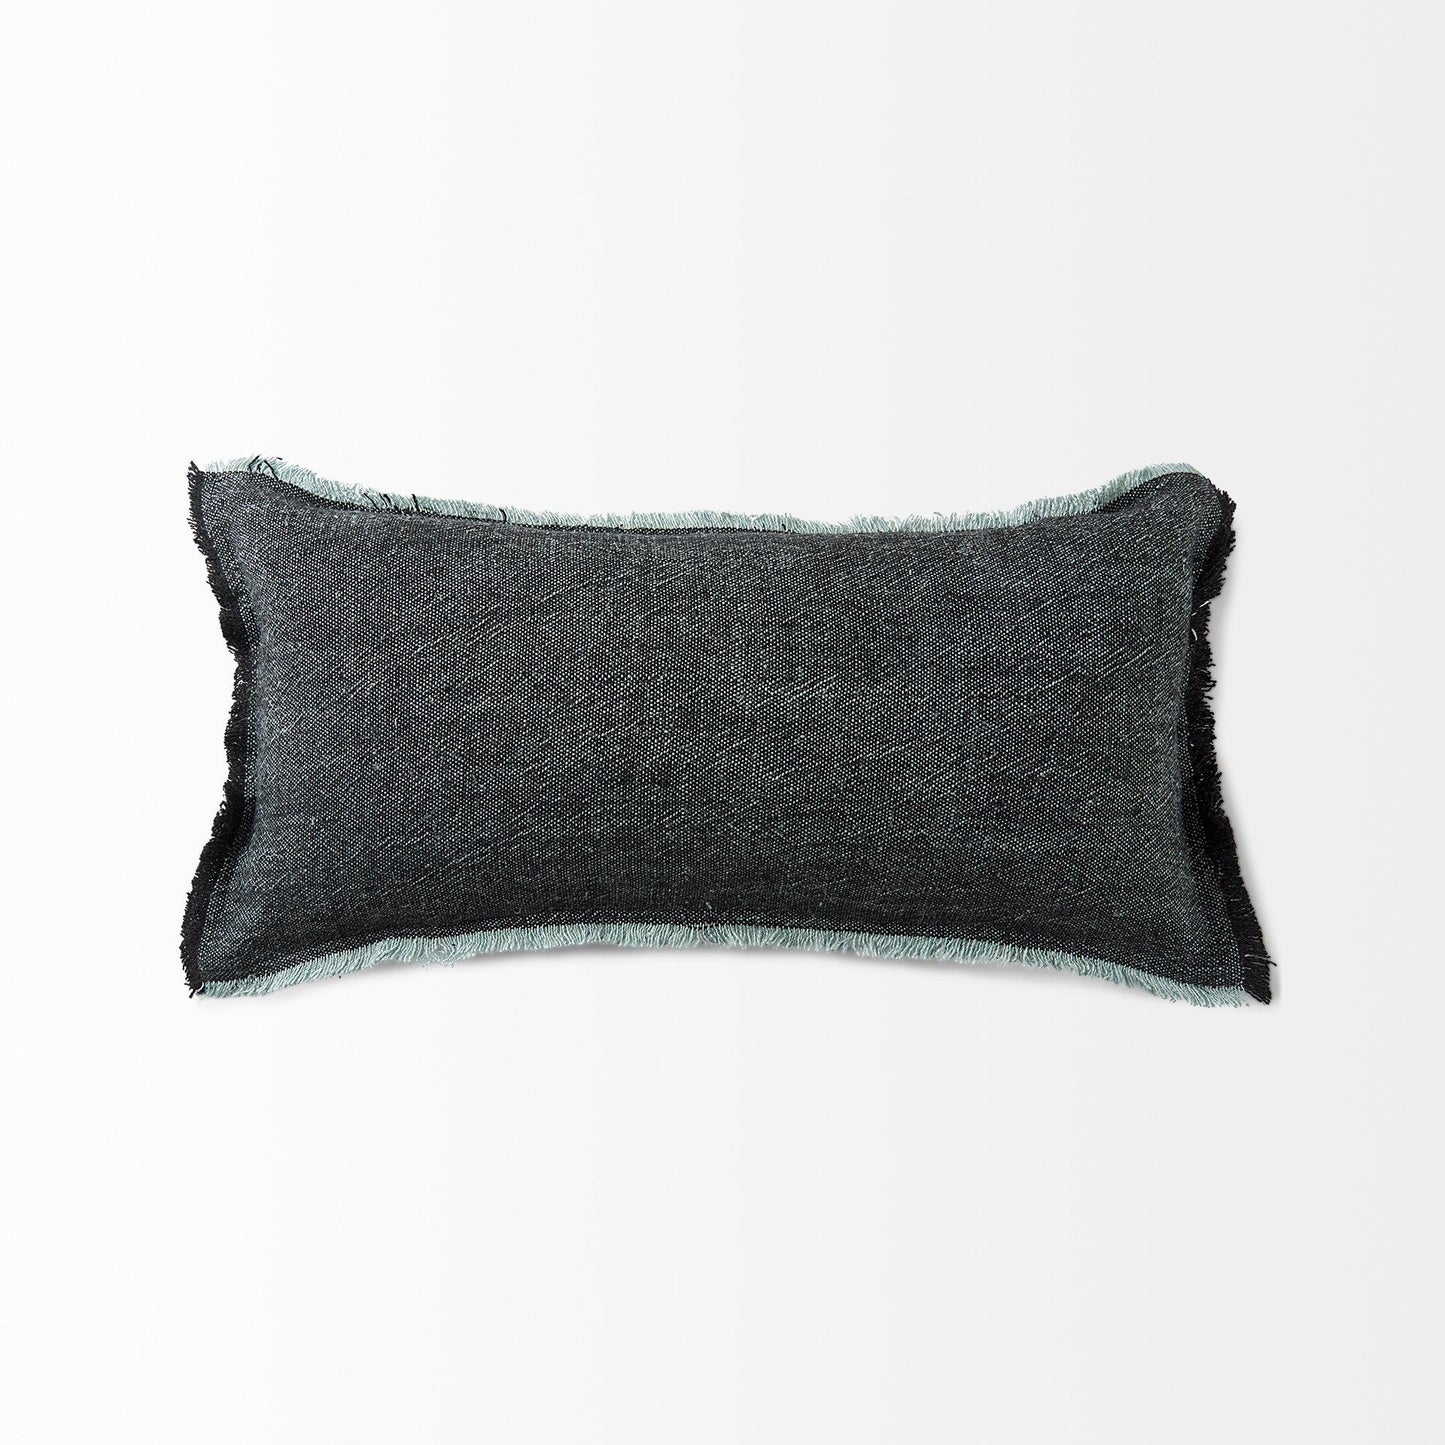 Malia 14L x 26W Black and Teal Fabric Fringed Decorative Pillow Cover